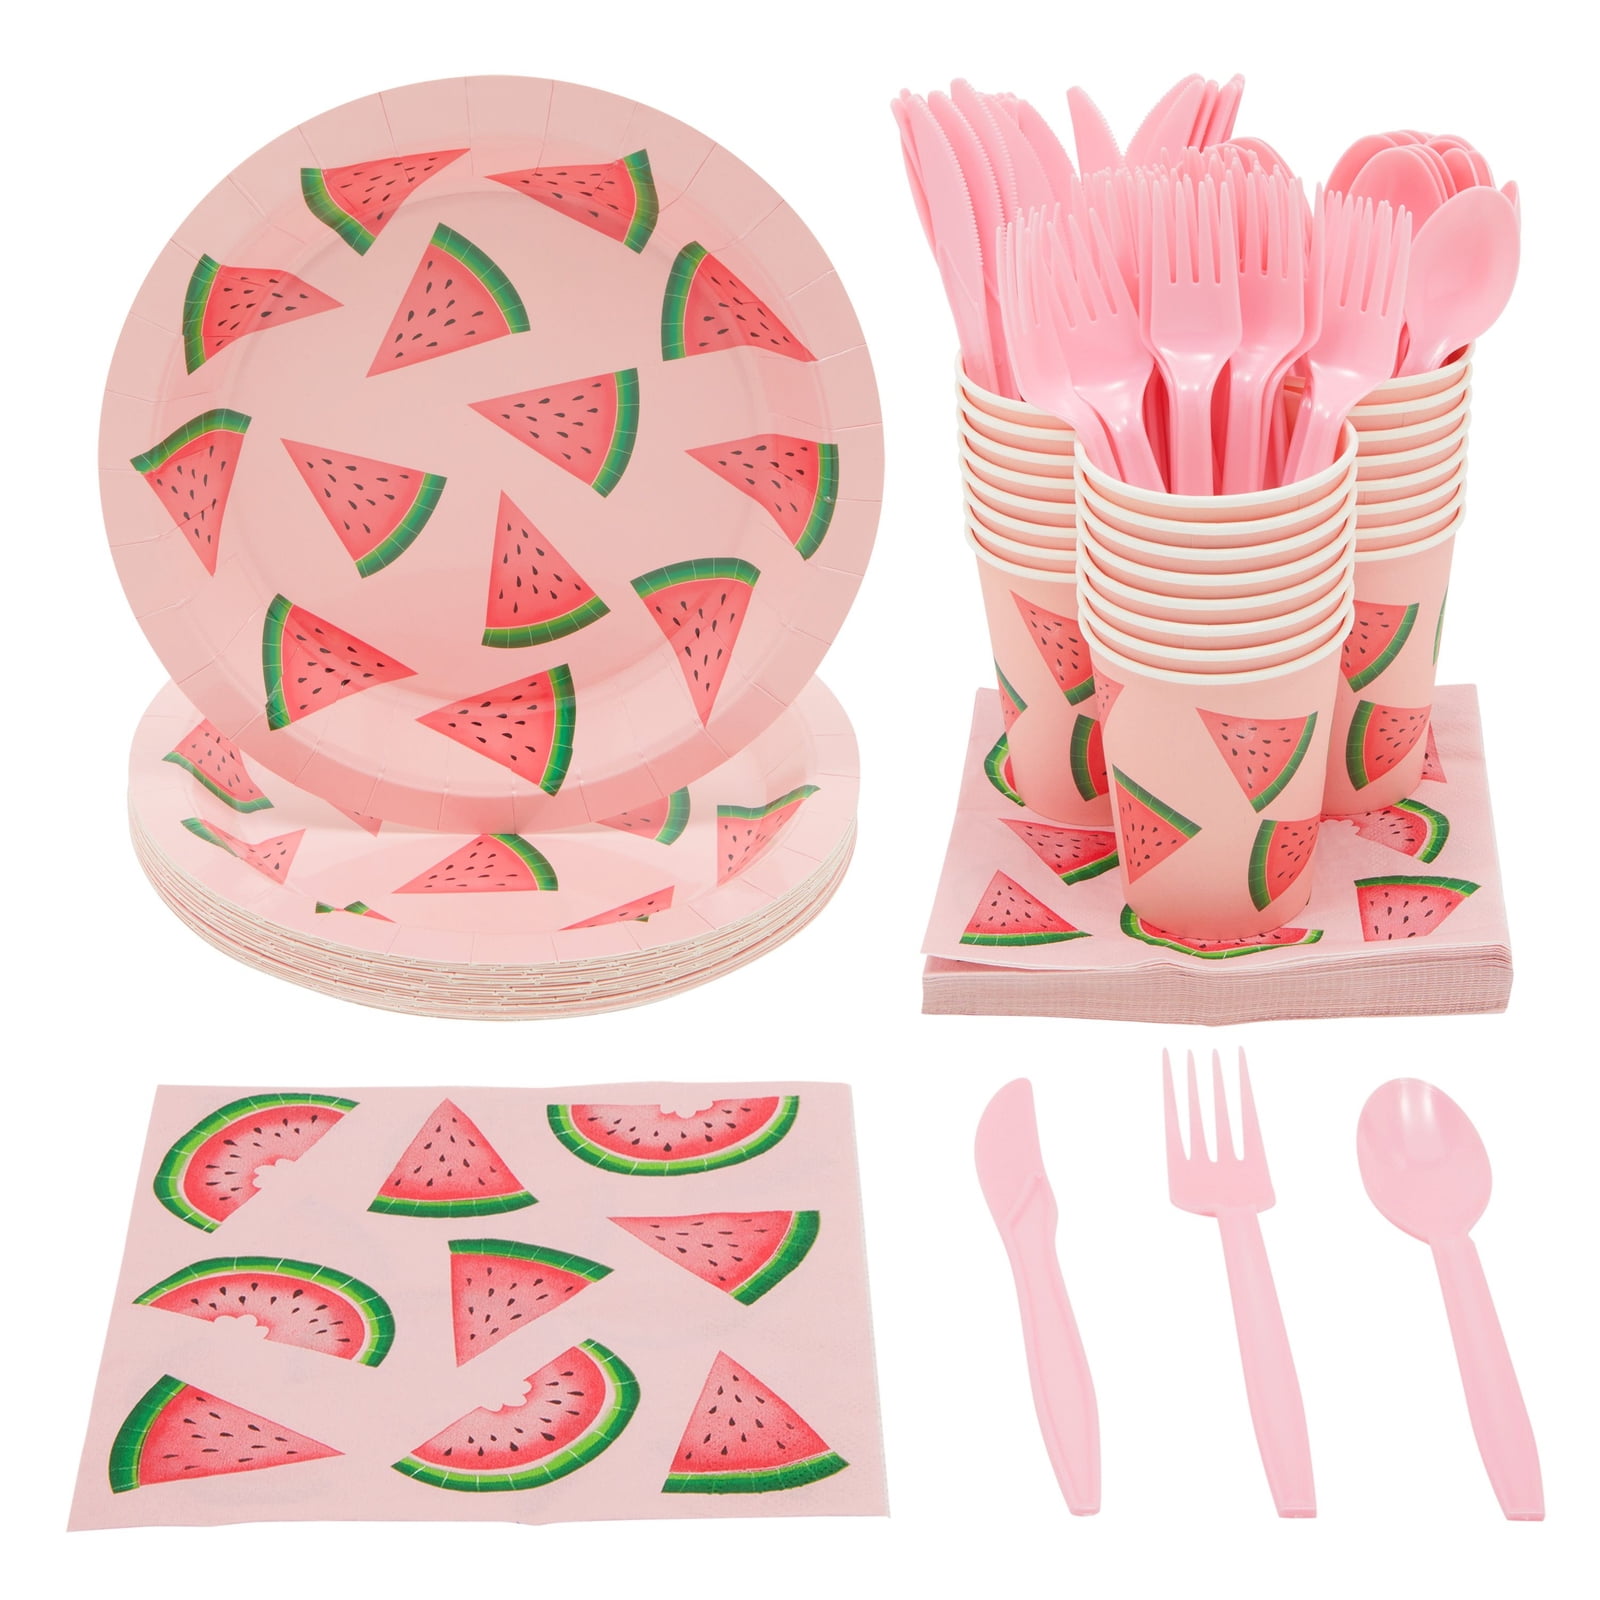 WERNNSAI Watermelon Birthday Party Supplies One in a Melon Party Decor for Girls 1st Birthday Banner Balloons Tablecloth Plates Cups Napkins Spoons Forks Cutlery Bag Utensils Serves 16 Guests 153PCS